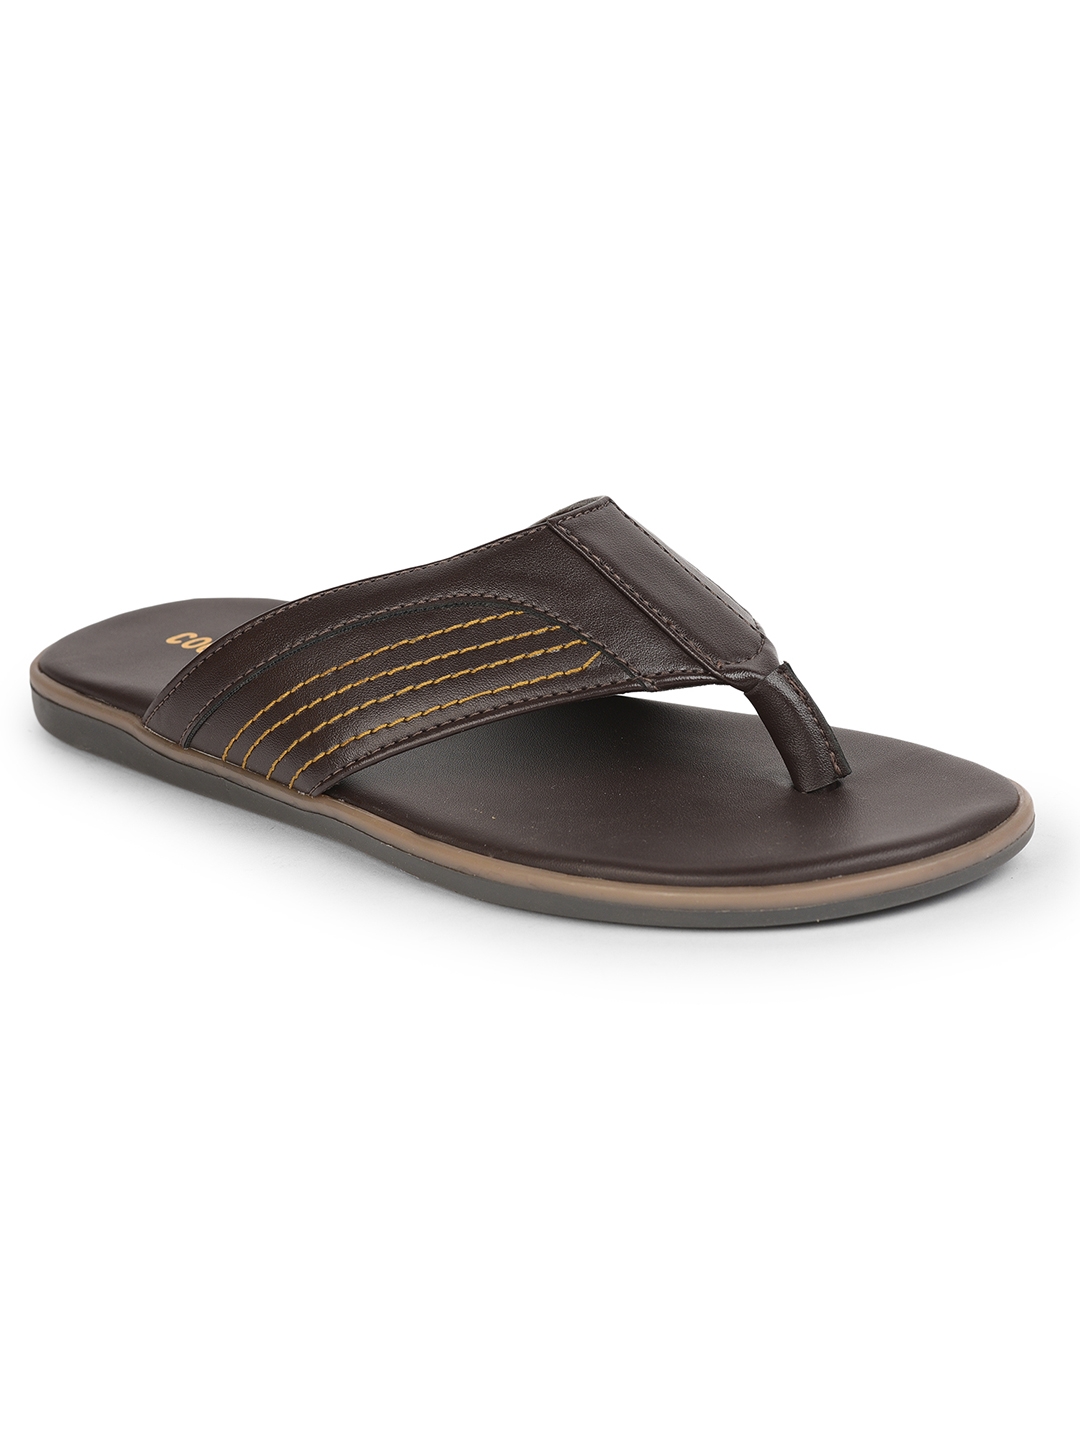 Liberty | Coolers by Liberty Brown Flip Flops AVN-41 For :- Men